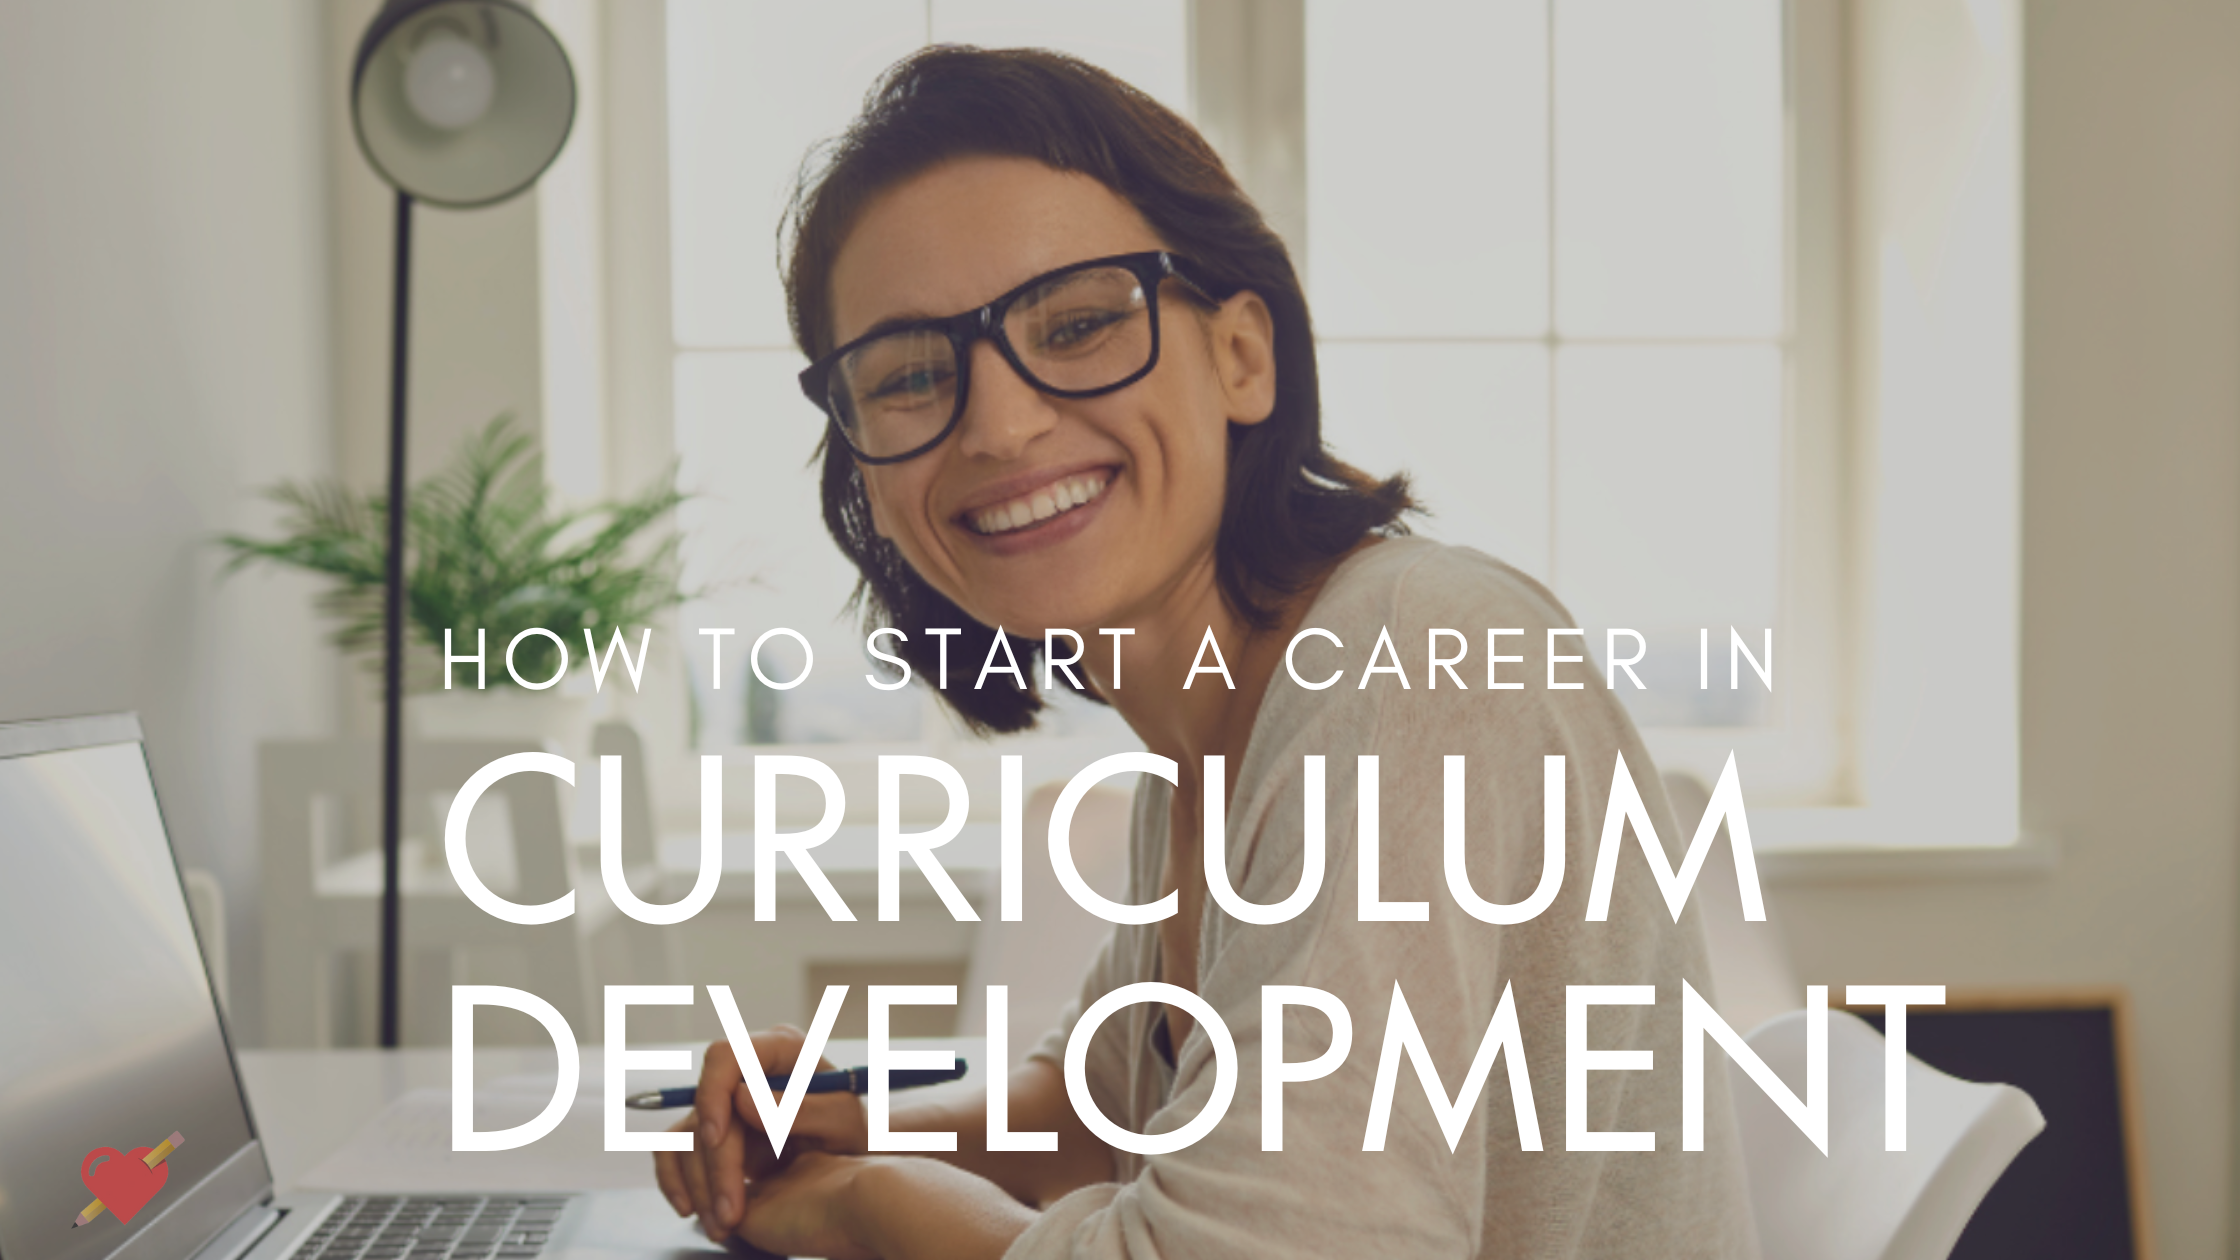 How to Become Curriculum Developer